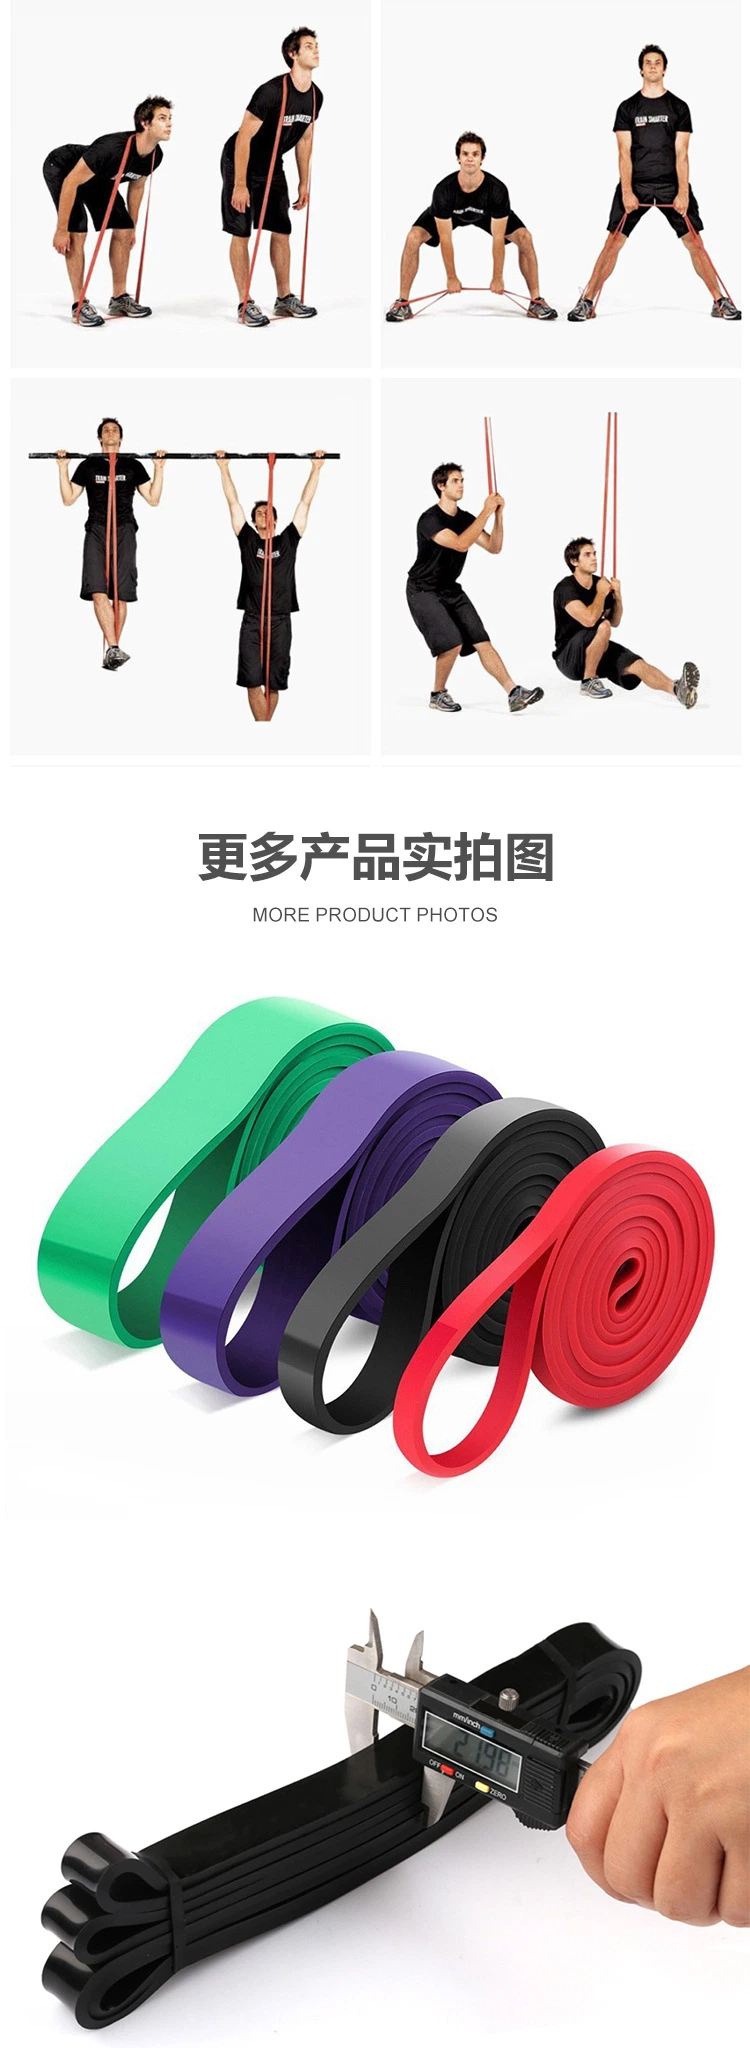 Non-Slip 5-in-1 Pull up Bands Stretch Fitness Thick Workout Resistance Band for Cardio Training in Home &Gym